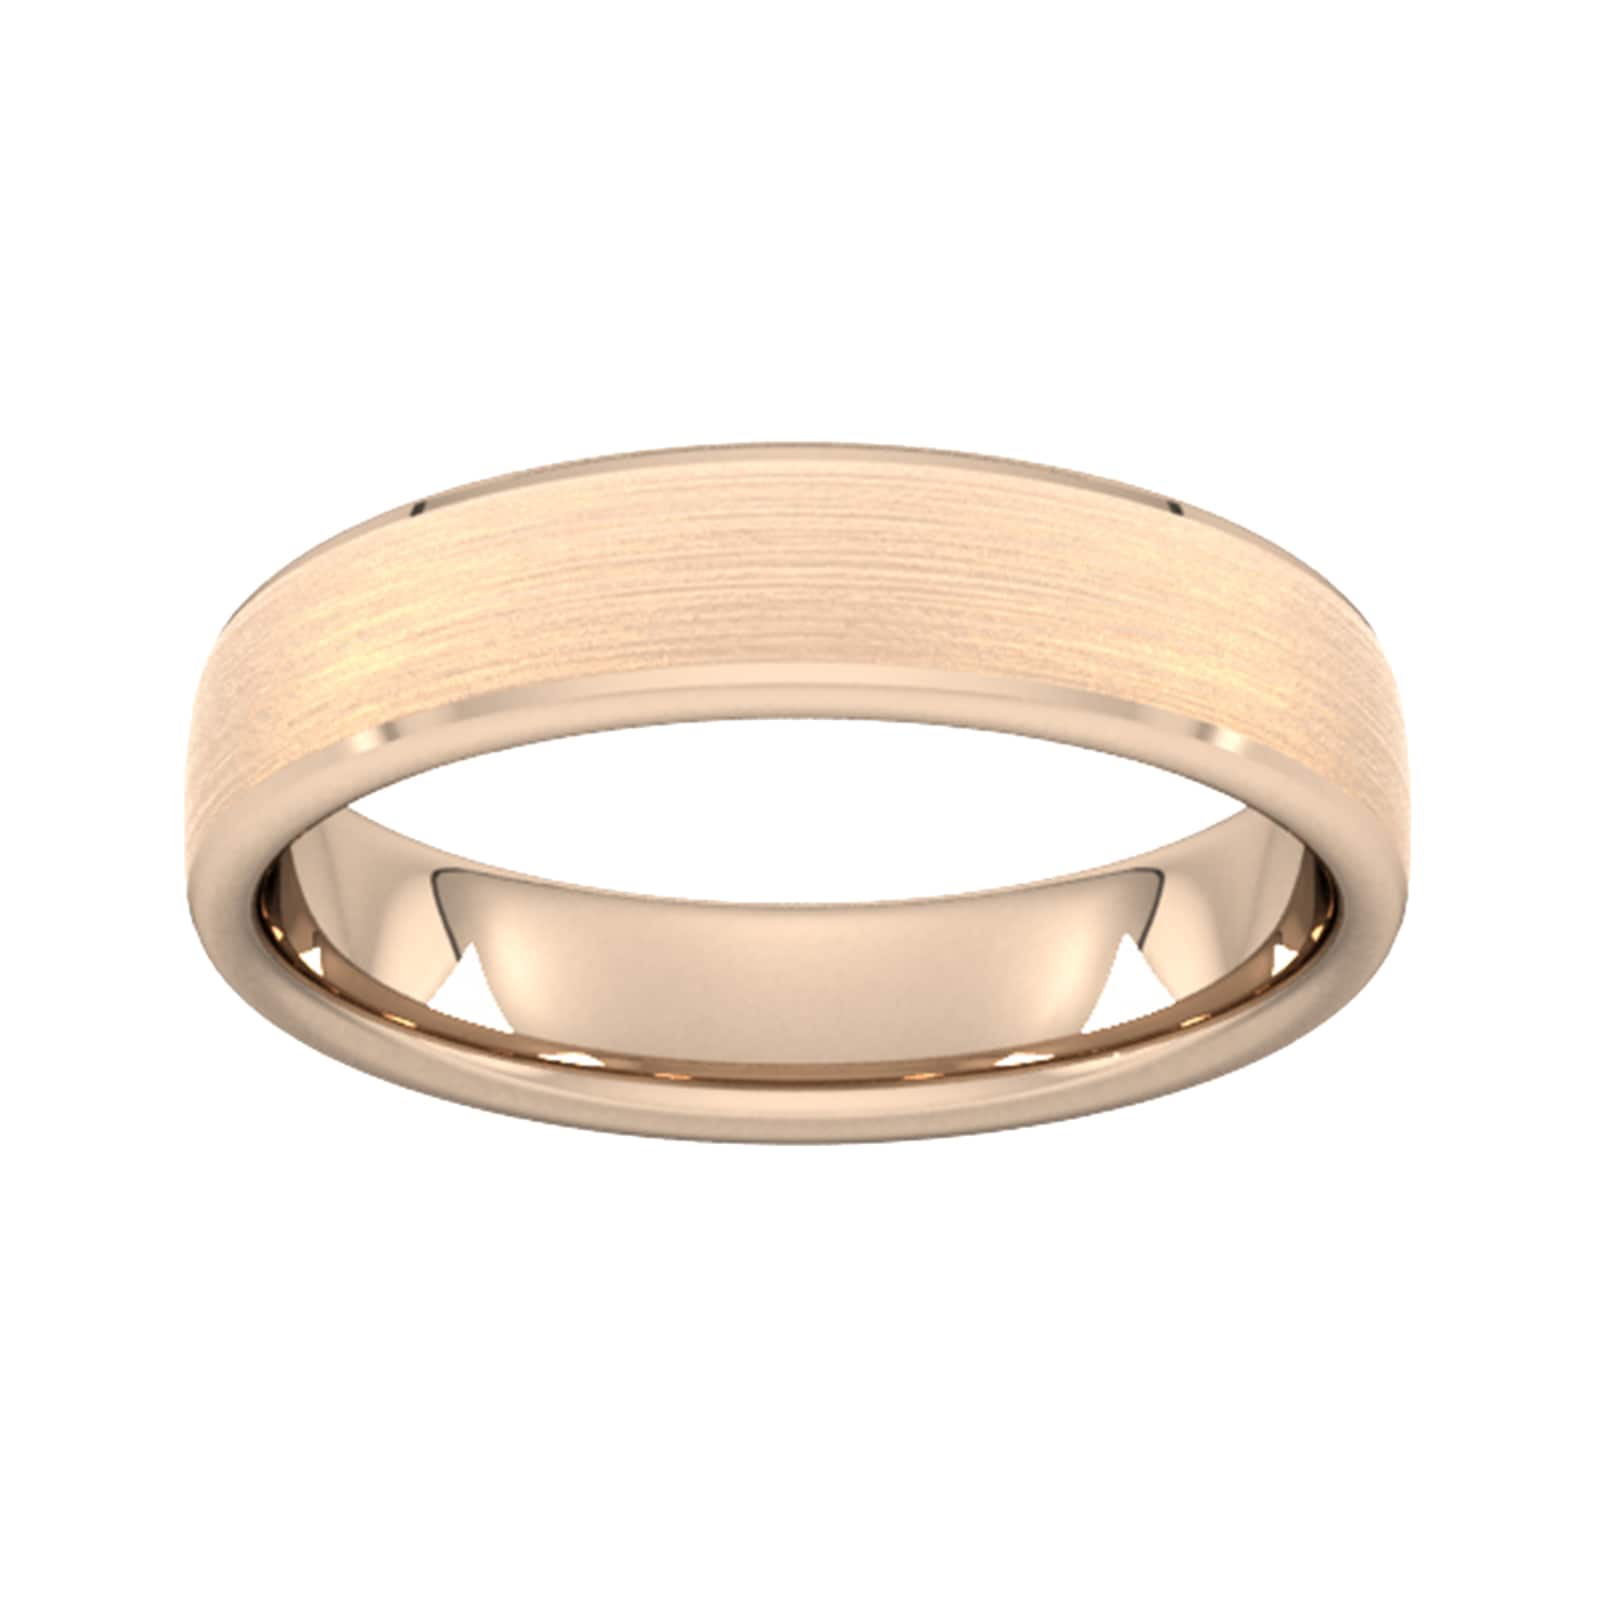 5mm Traditional Court Heavy Polished Chamfered Edges With Matt Centre Wedding Ring In 9 Carat Rose Gold - Ring Size O